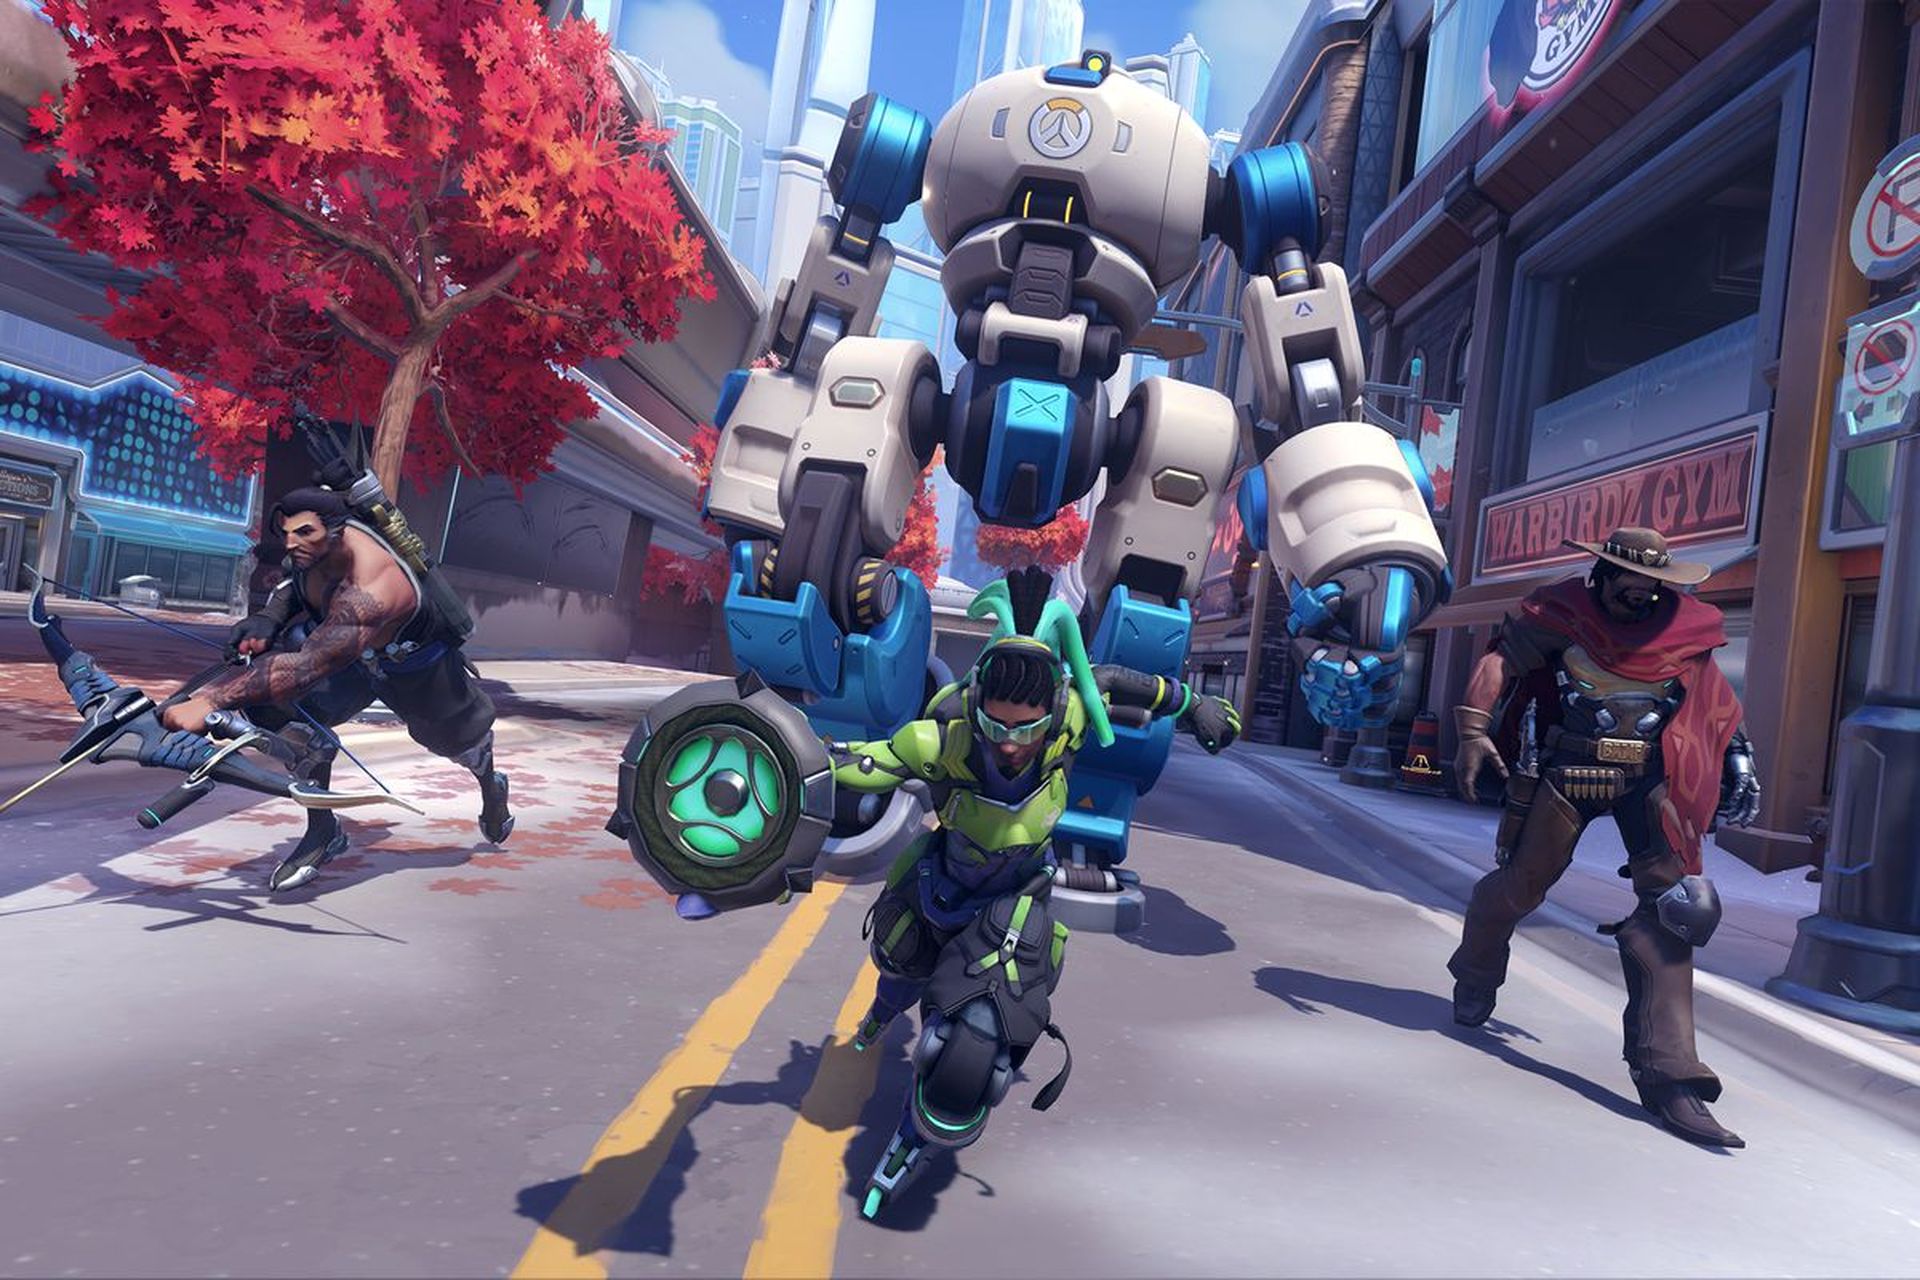 In this article, we are going to be covering how to fix the Overwatch 2 mic not working, so you can enjoy the game and communicate with your team.